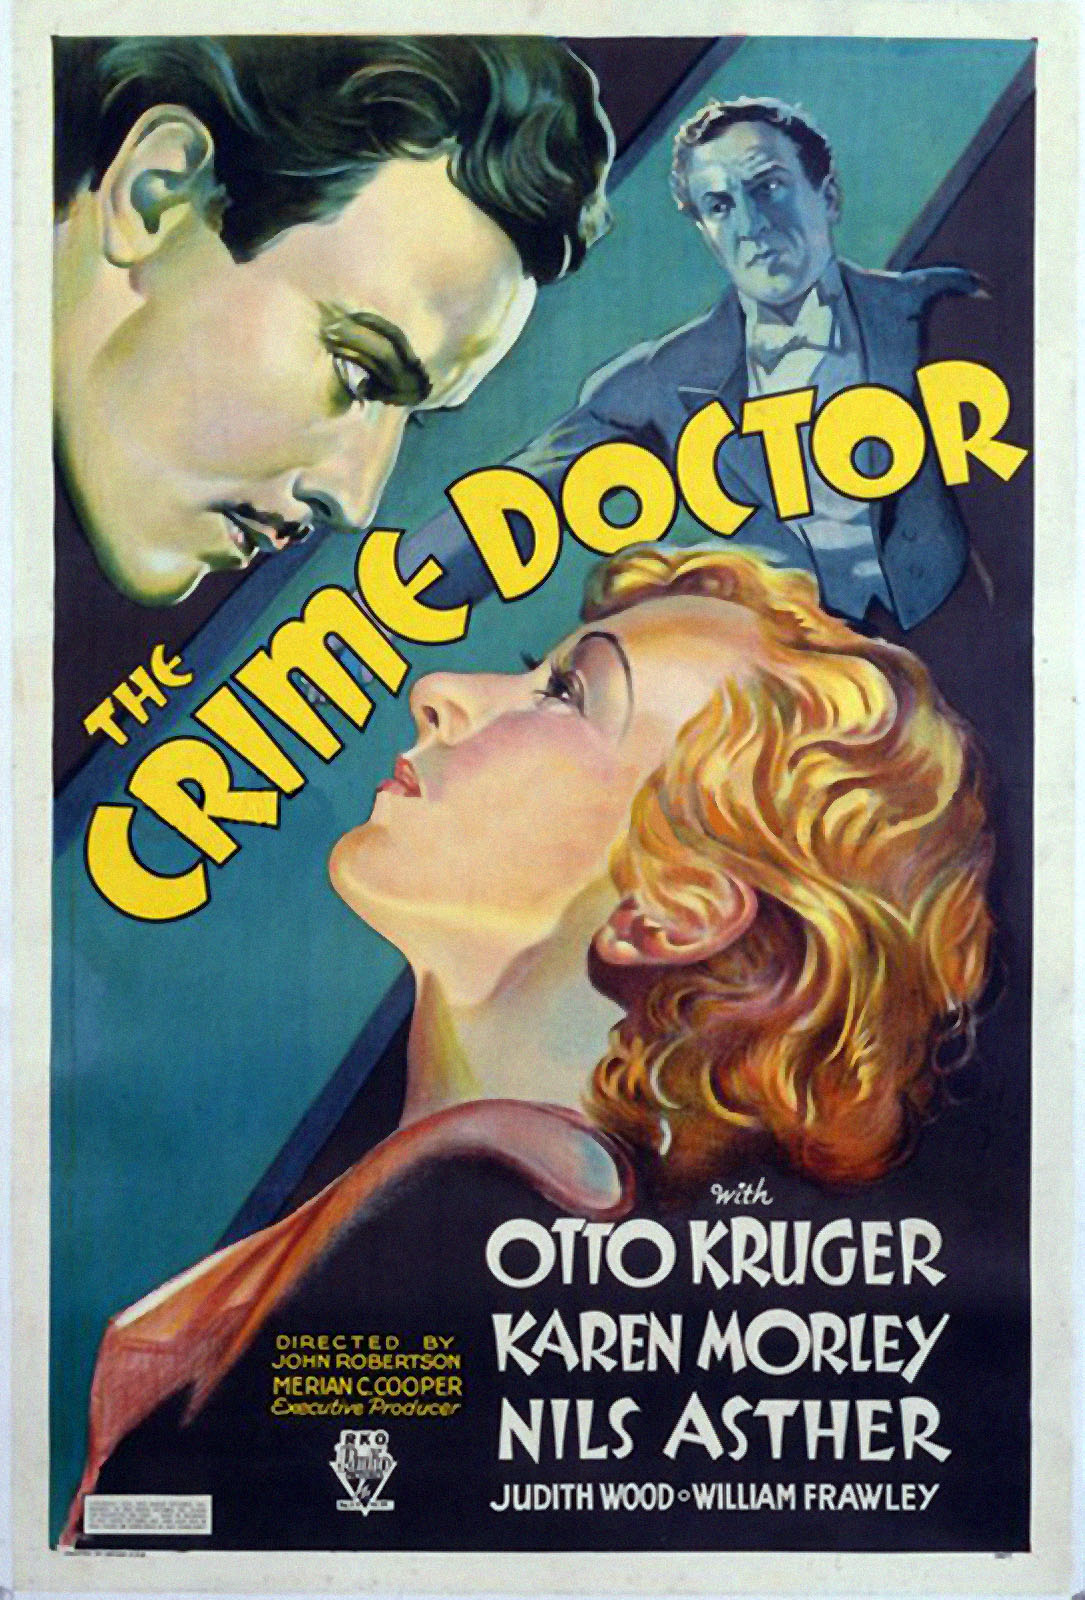 CRIME DOCTOR, THE